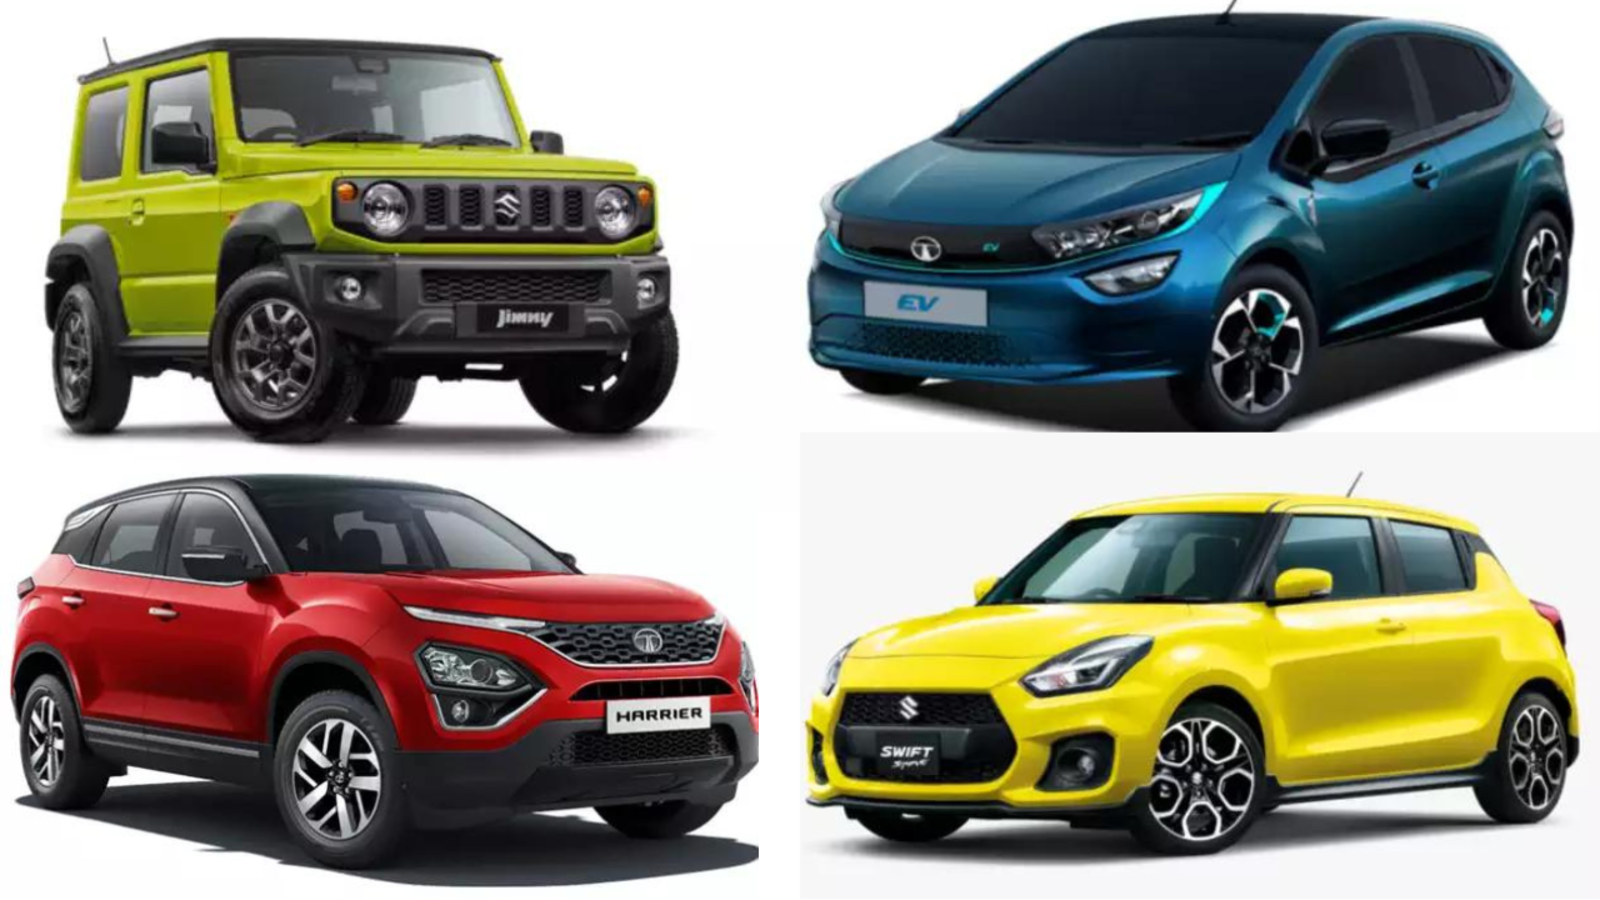 Maruti Suzuki Swift was the largest selling car in India in 2023